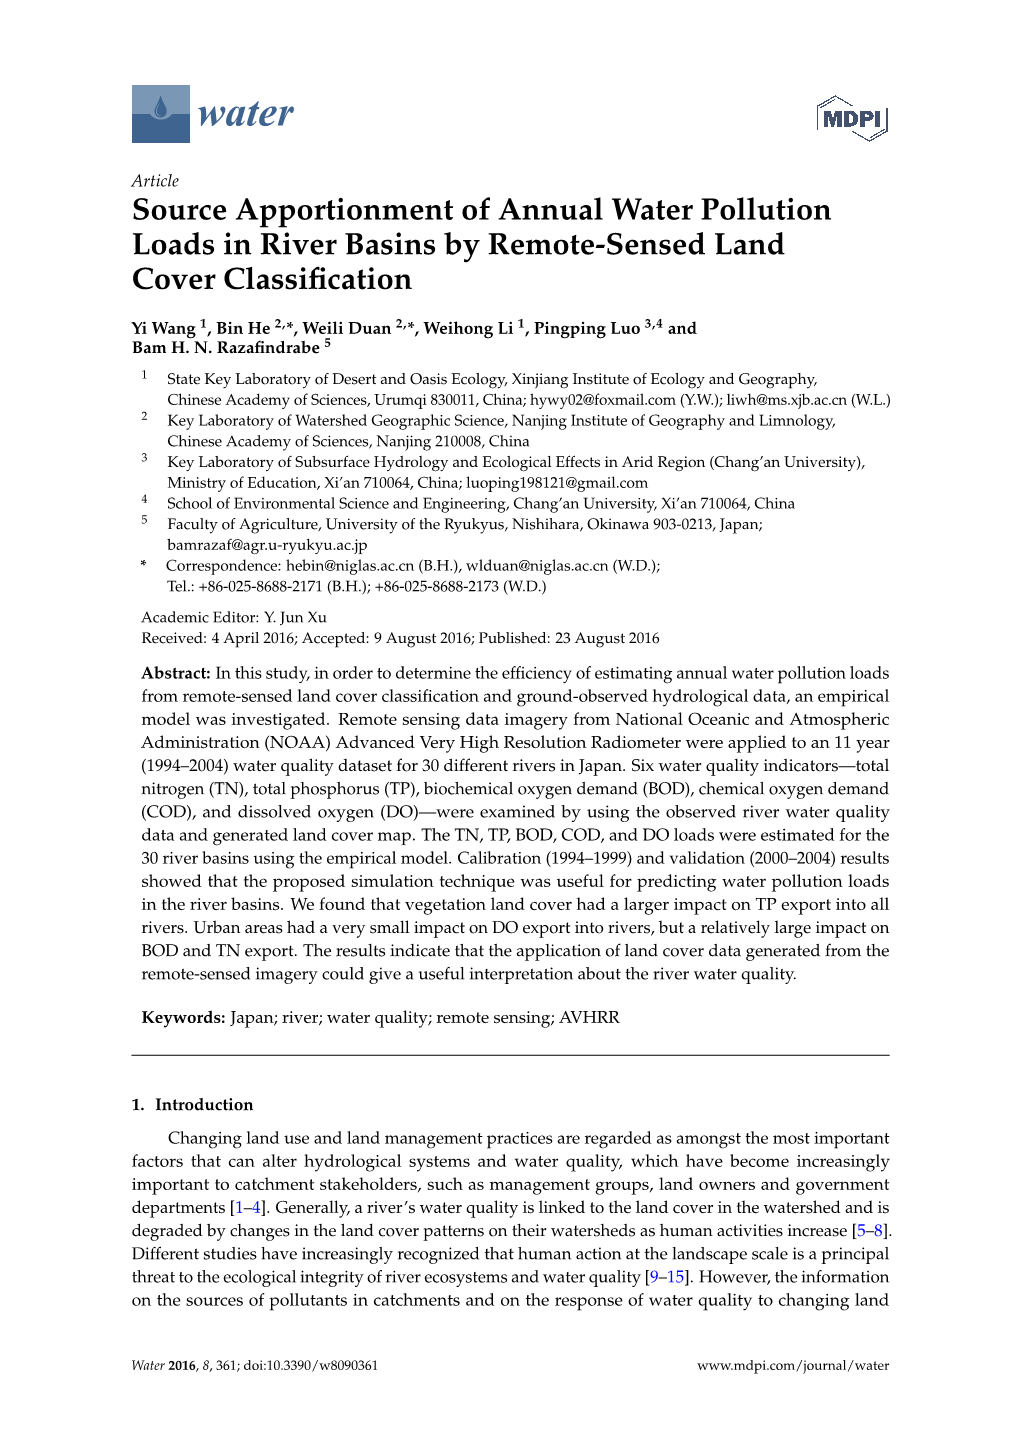 Source Apportionment of Annual Water Pollution Loads in River Basins by Remote-Sensed Land Cover Classiﬁcation